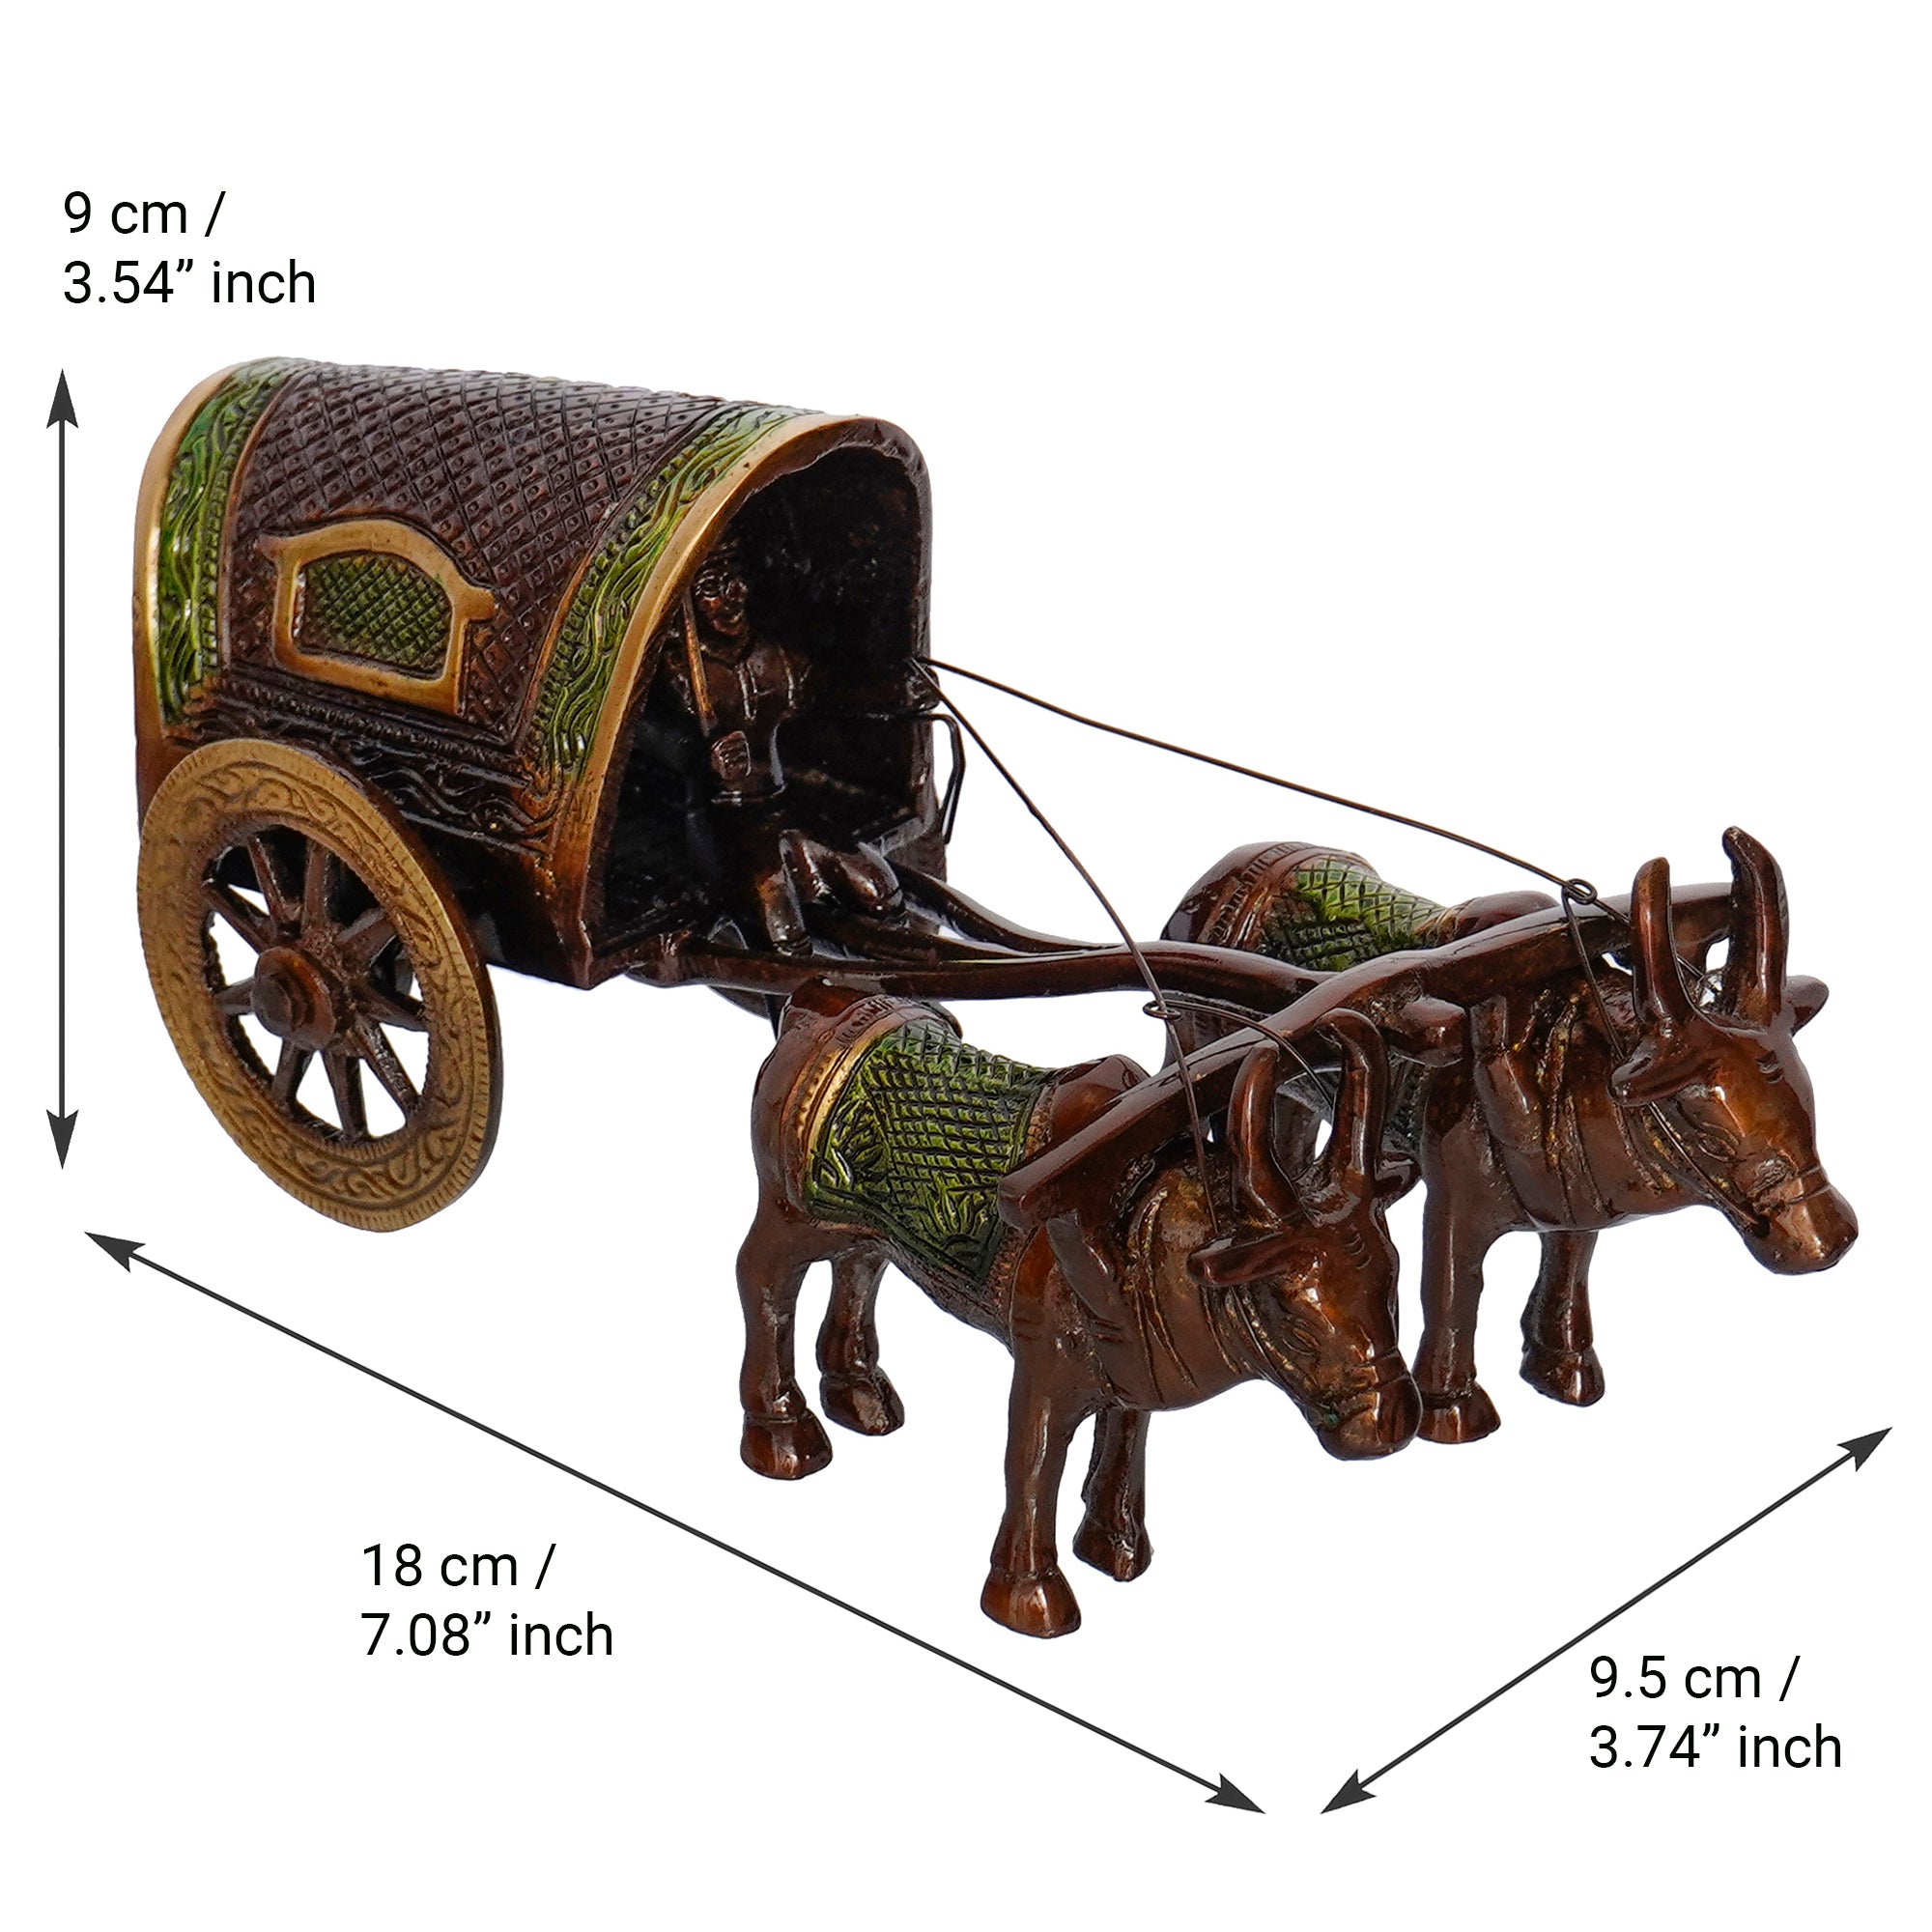 Designer Pearl Rakhi with Brass Brown and Green Antique Finish Closed Bullock Cart  and Roli Chawal Pack, Best Wishes Greeting Card 3